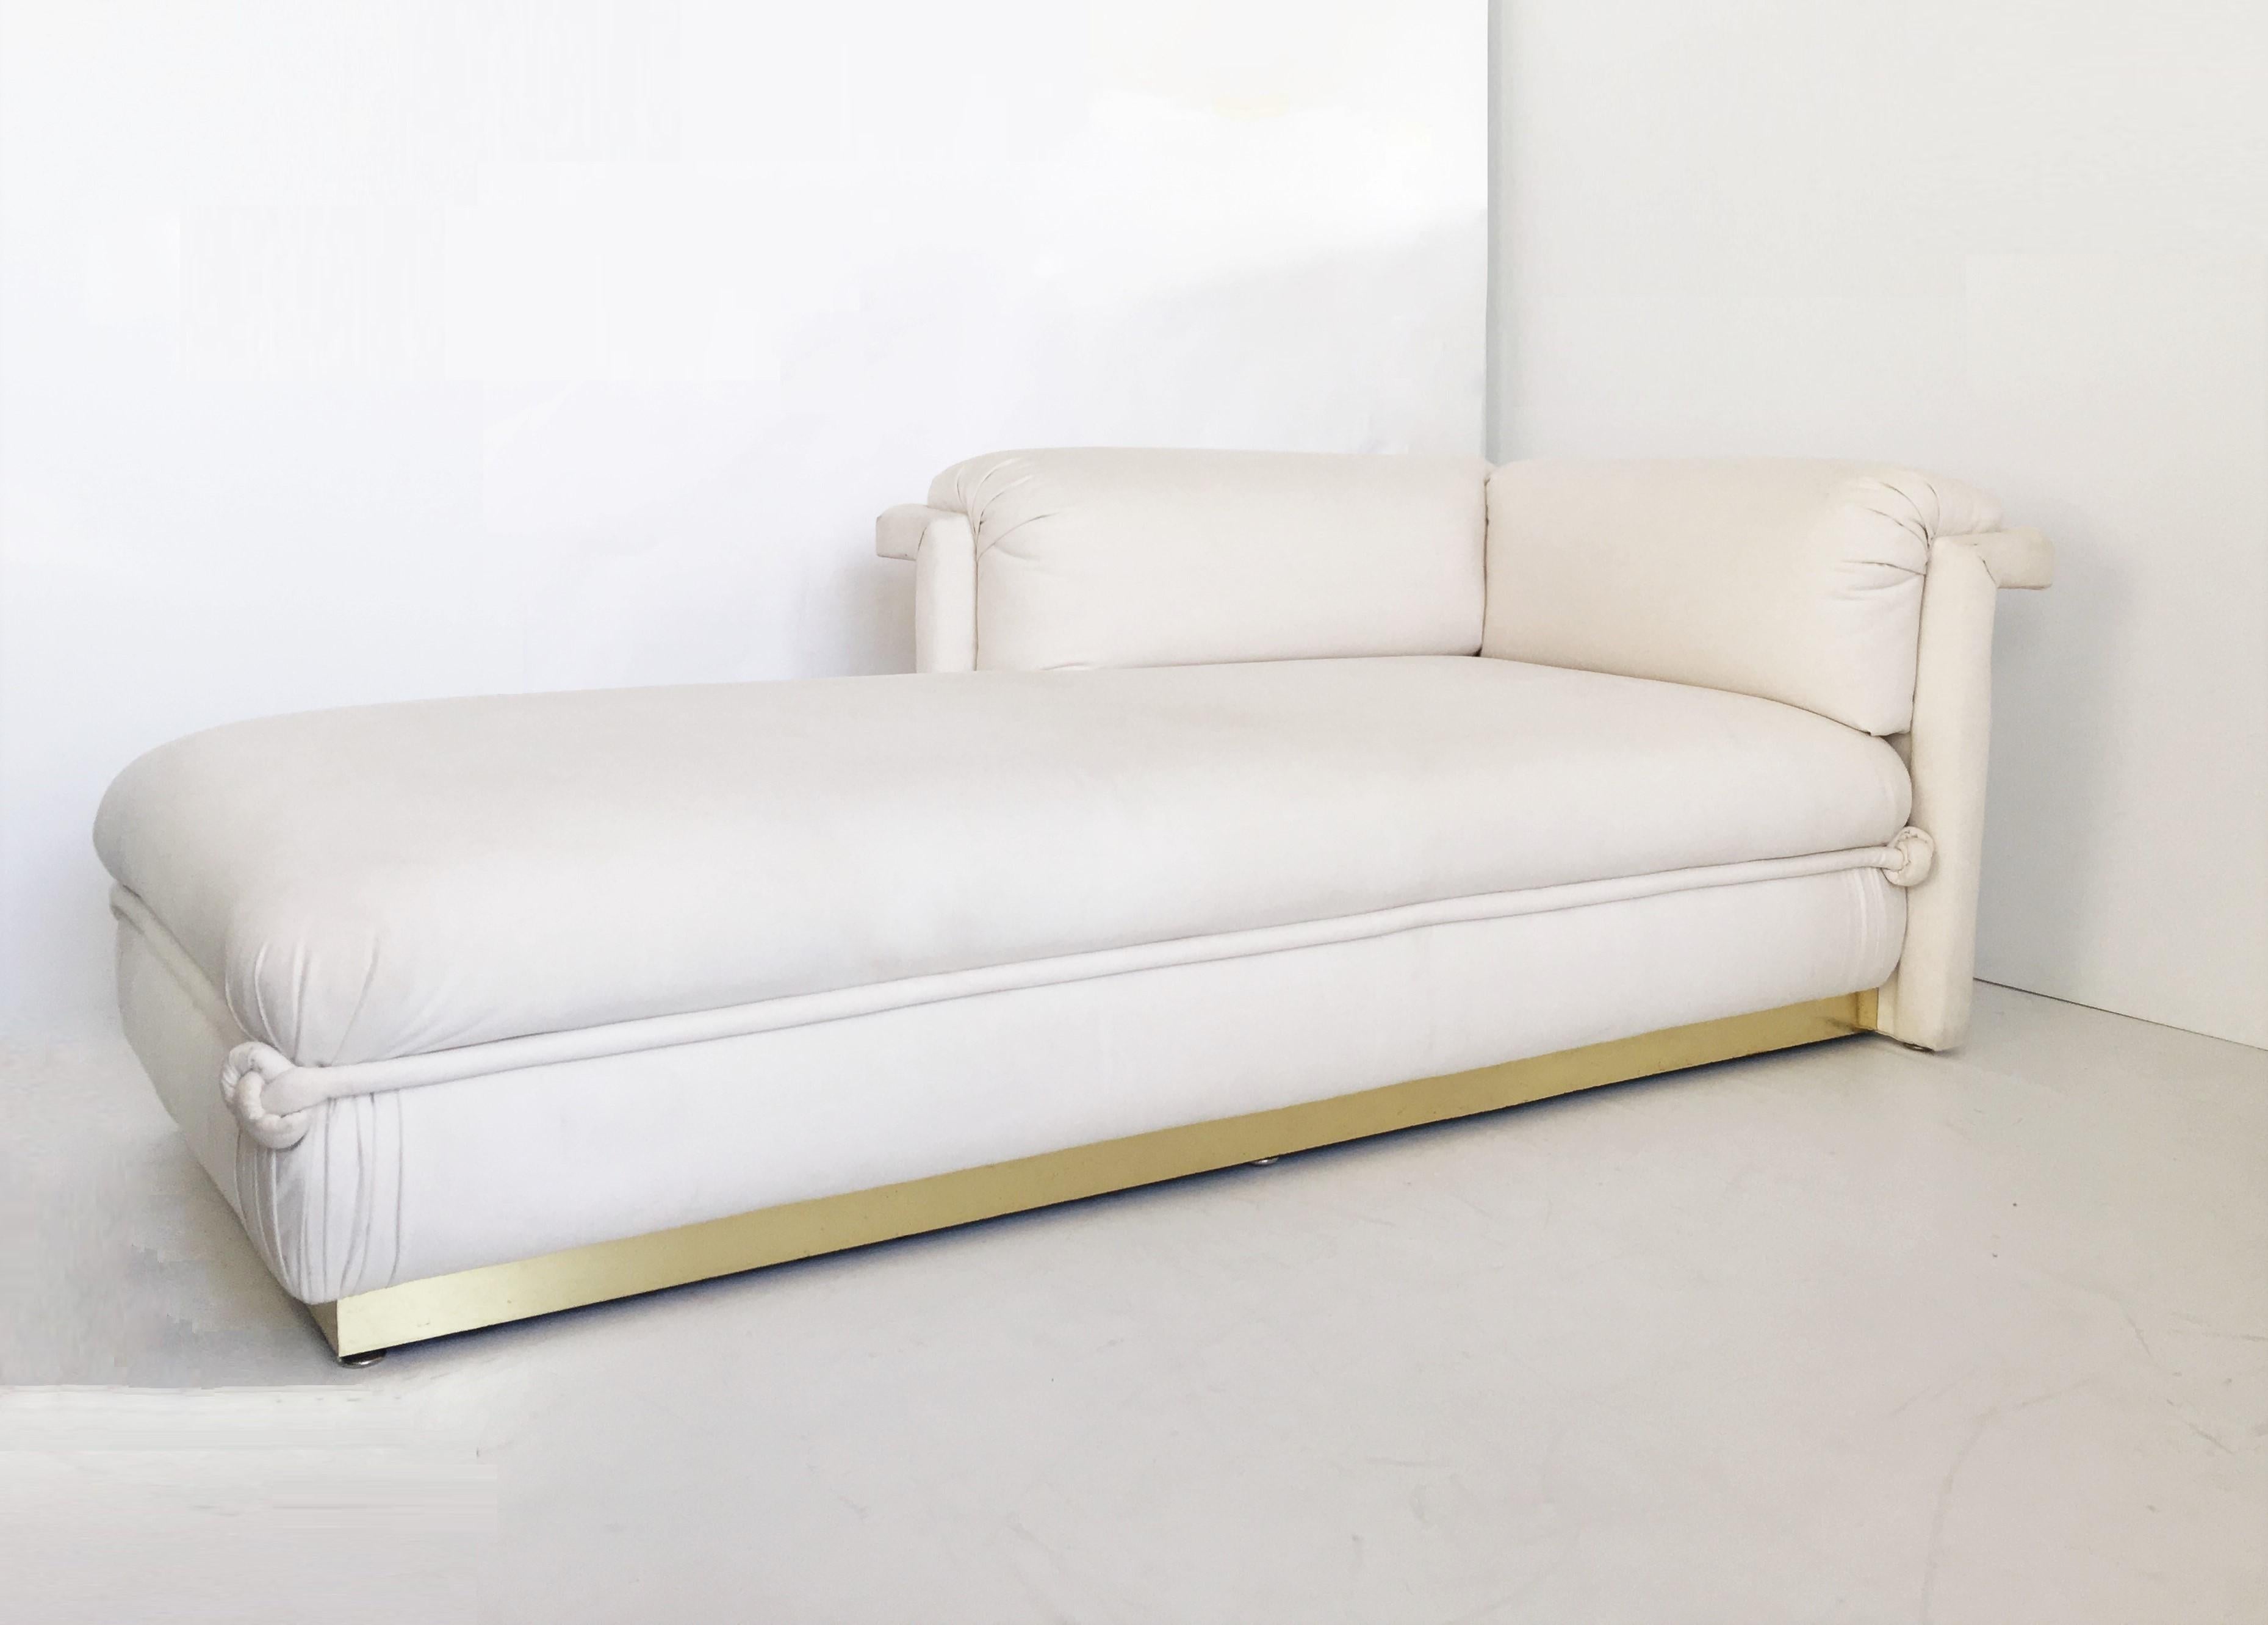 French Art Deco Chaise Longue with Brass Base In Good Condition For Sale In Dallas, TX